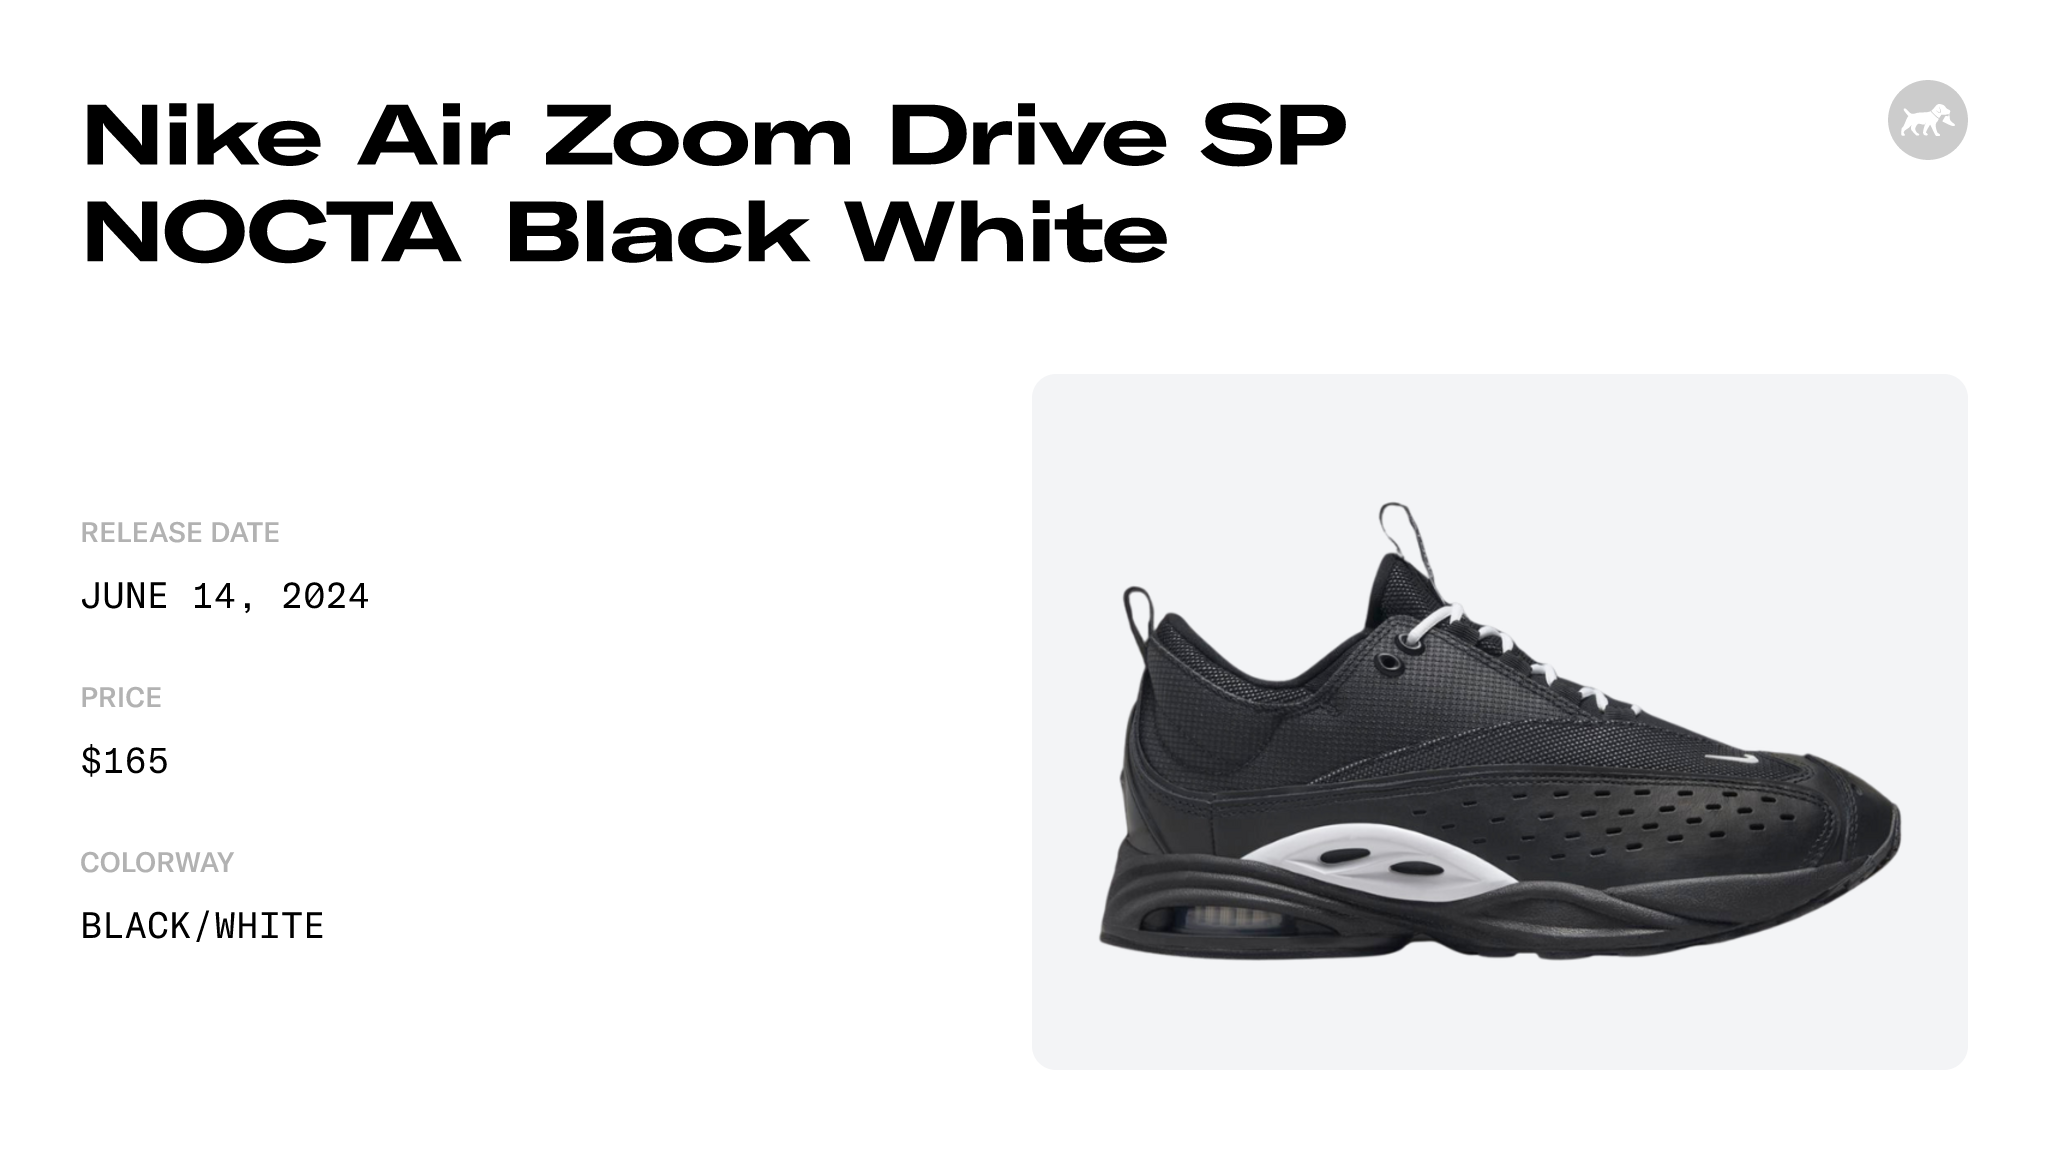 NOCTA Nike Air Zoom Drive Black White DX5854-001 Release